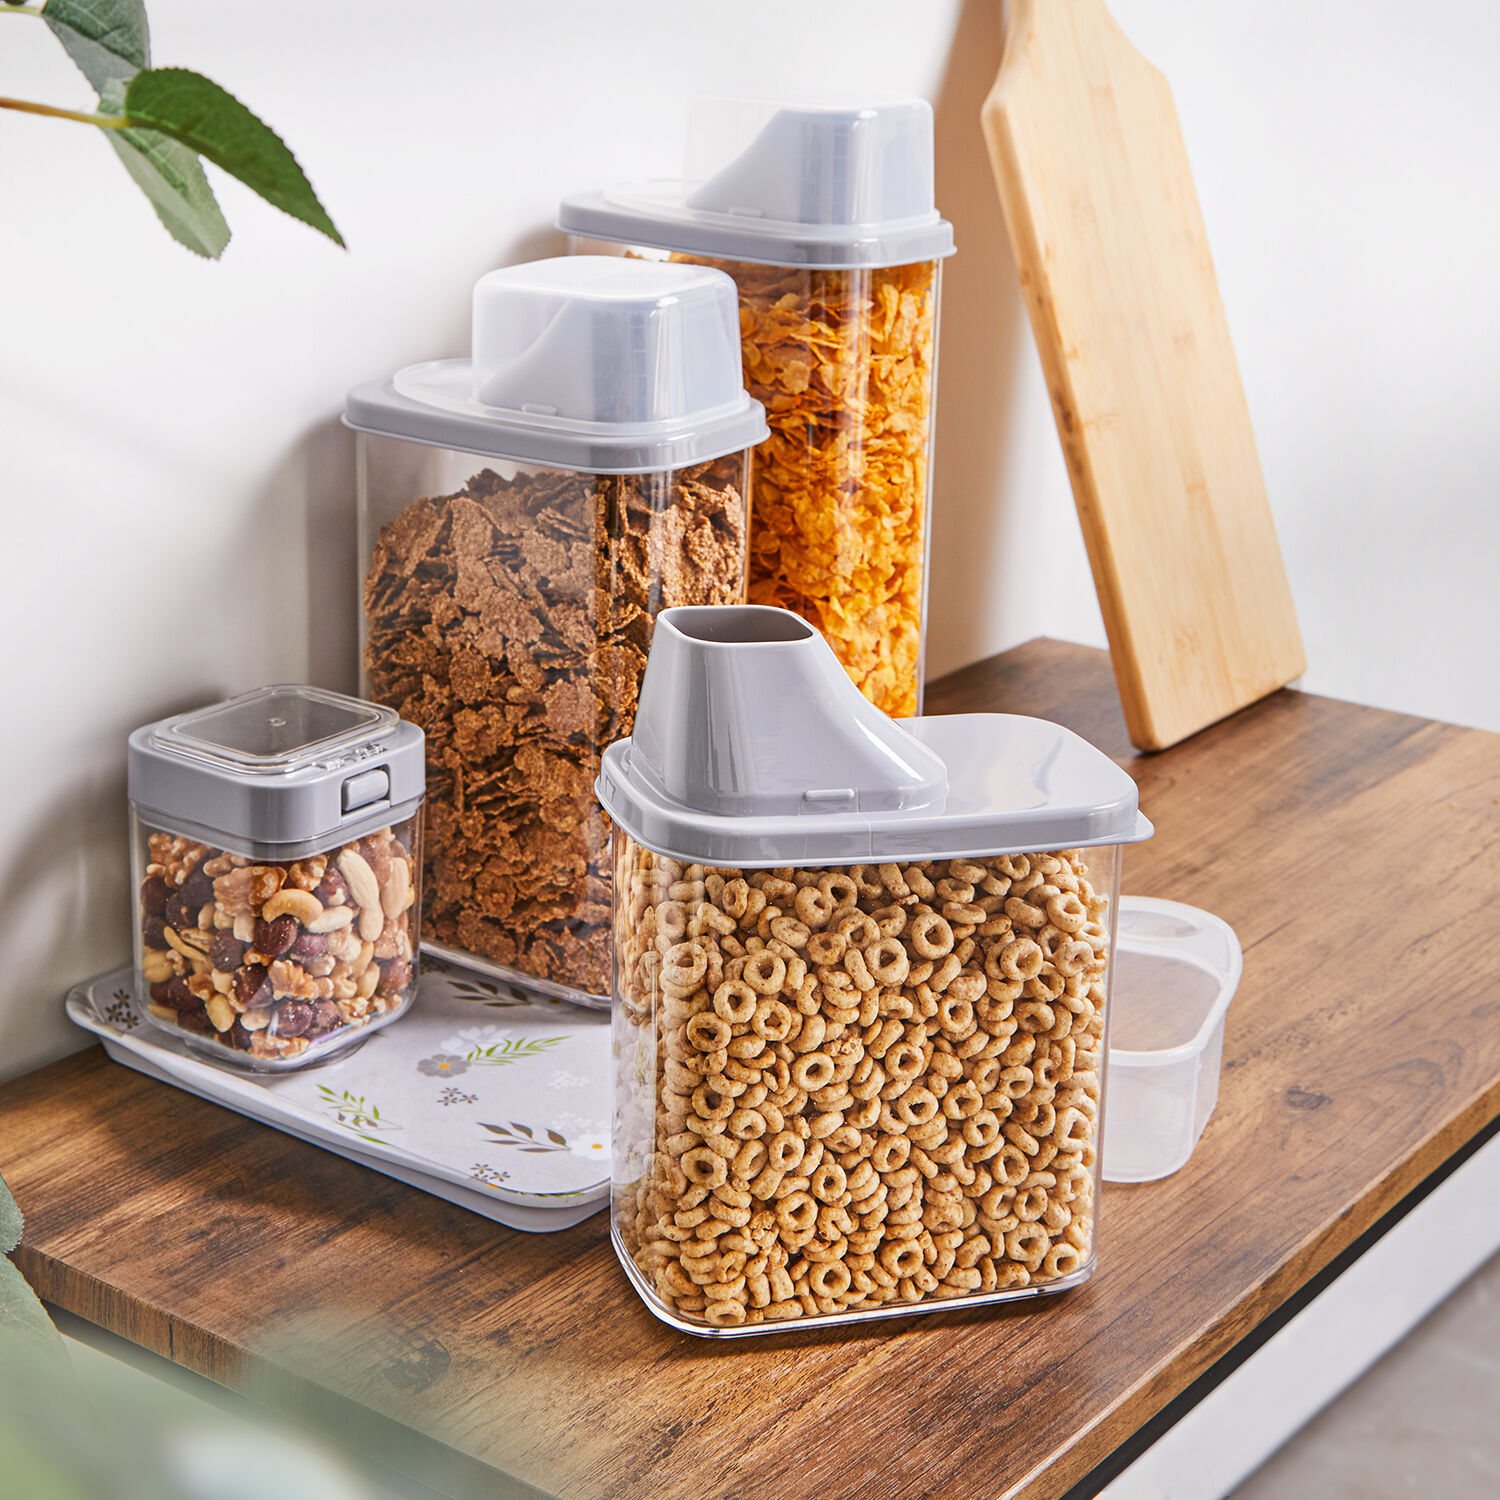 https://www.homestoreandmore.ie/dw/image/v2/BCBN_PRD/on/demandware.static/-/Sites-master/default/dwe178243f/images/Felli-1.6L-Cereal-Dispenser-With-Scooping-Cup-food-containers-117220-hi-res-2.jpg?sw=1500